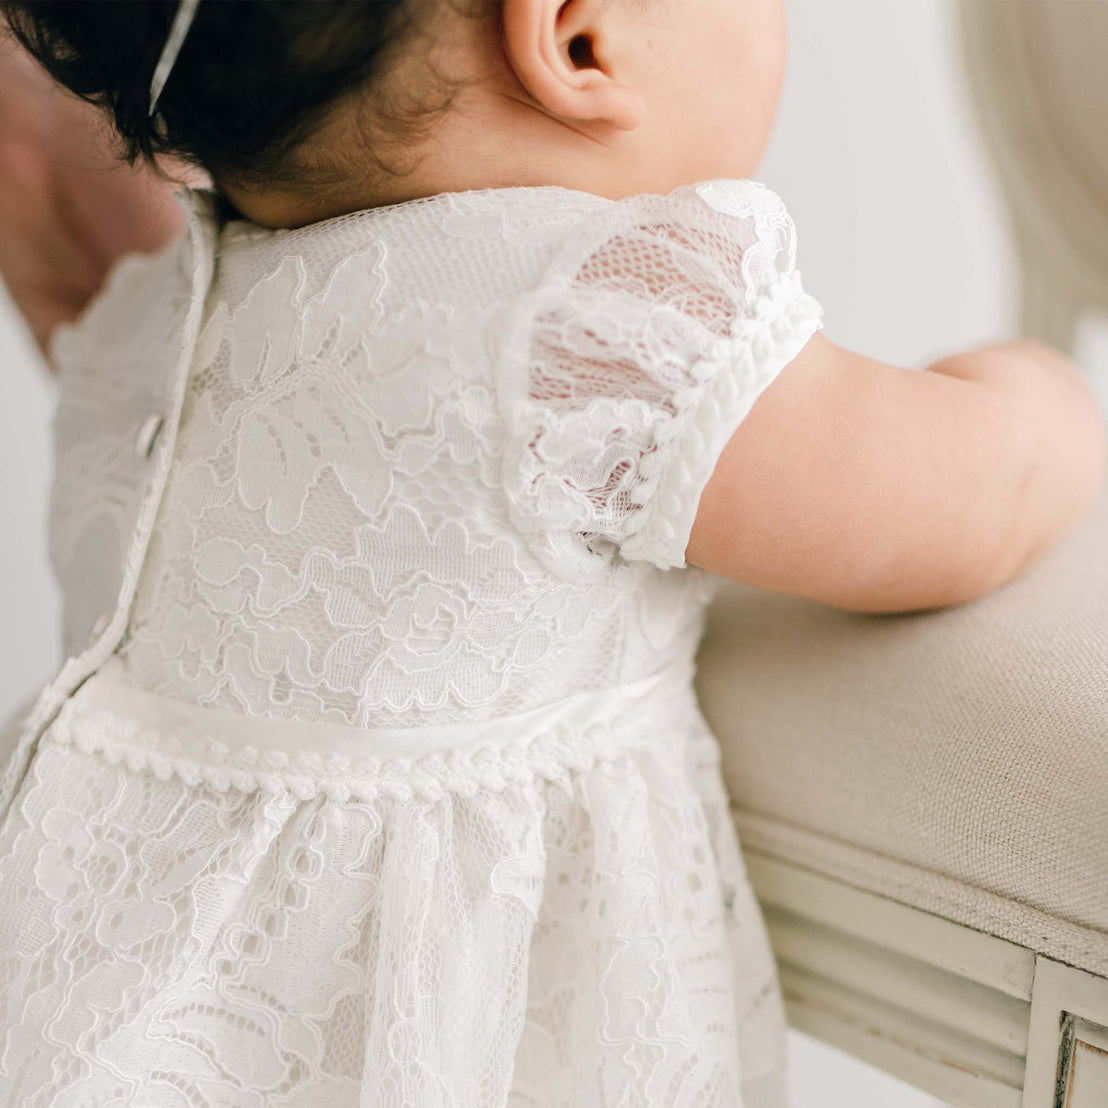 A young child wearing a white, handmade Victoria Puff Sleeve Christening Dress is seen from behind. The dress has short sleeves and button detailing along the back. The child’s dark hair is partially visible at the top of the image. The child is leaning against a light-colored surface.